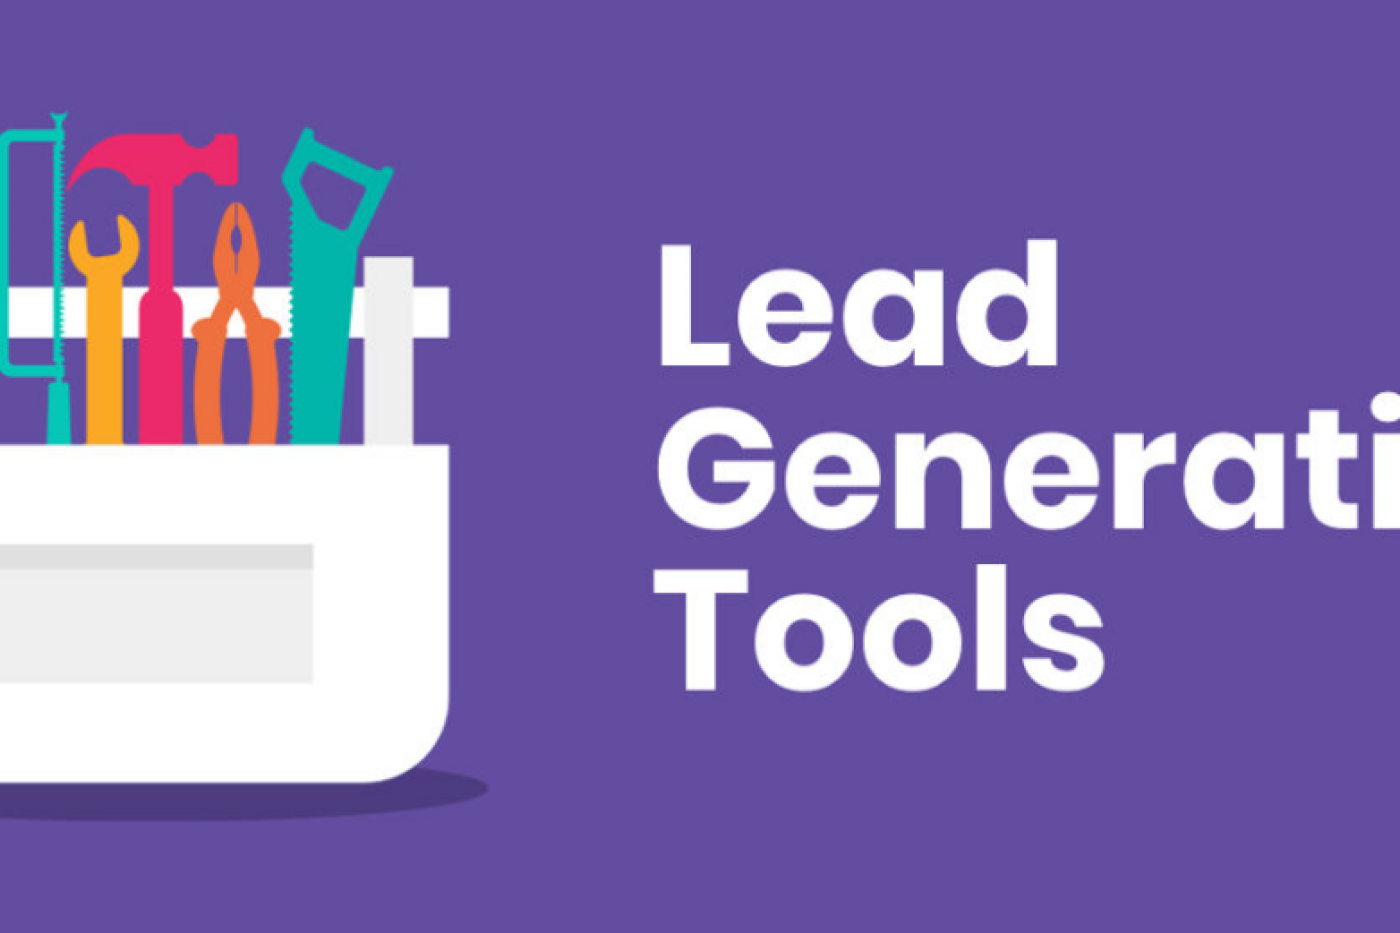 Guide To Lead Generation Tools